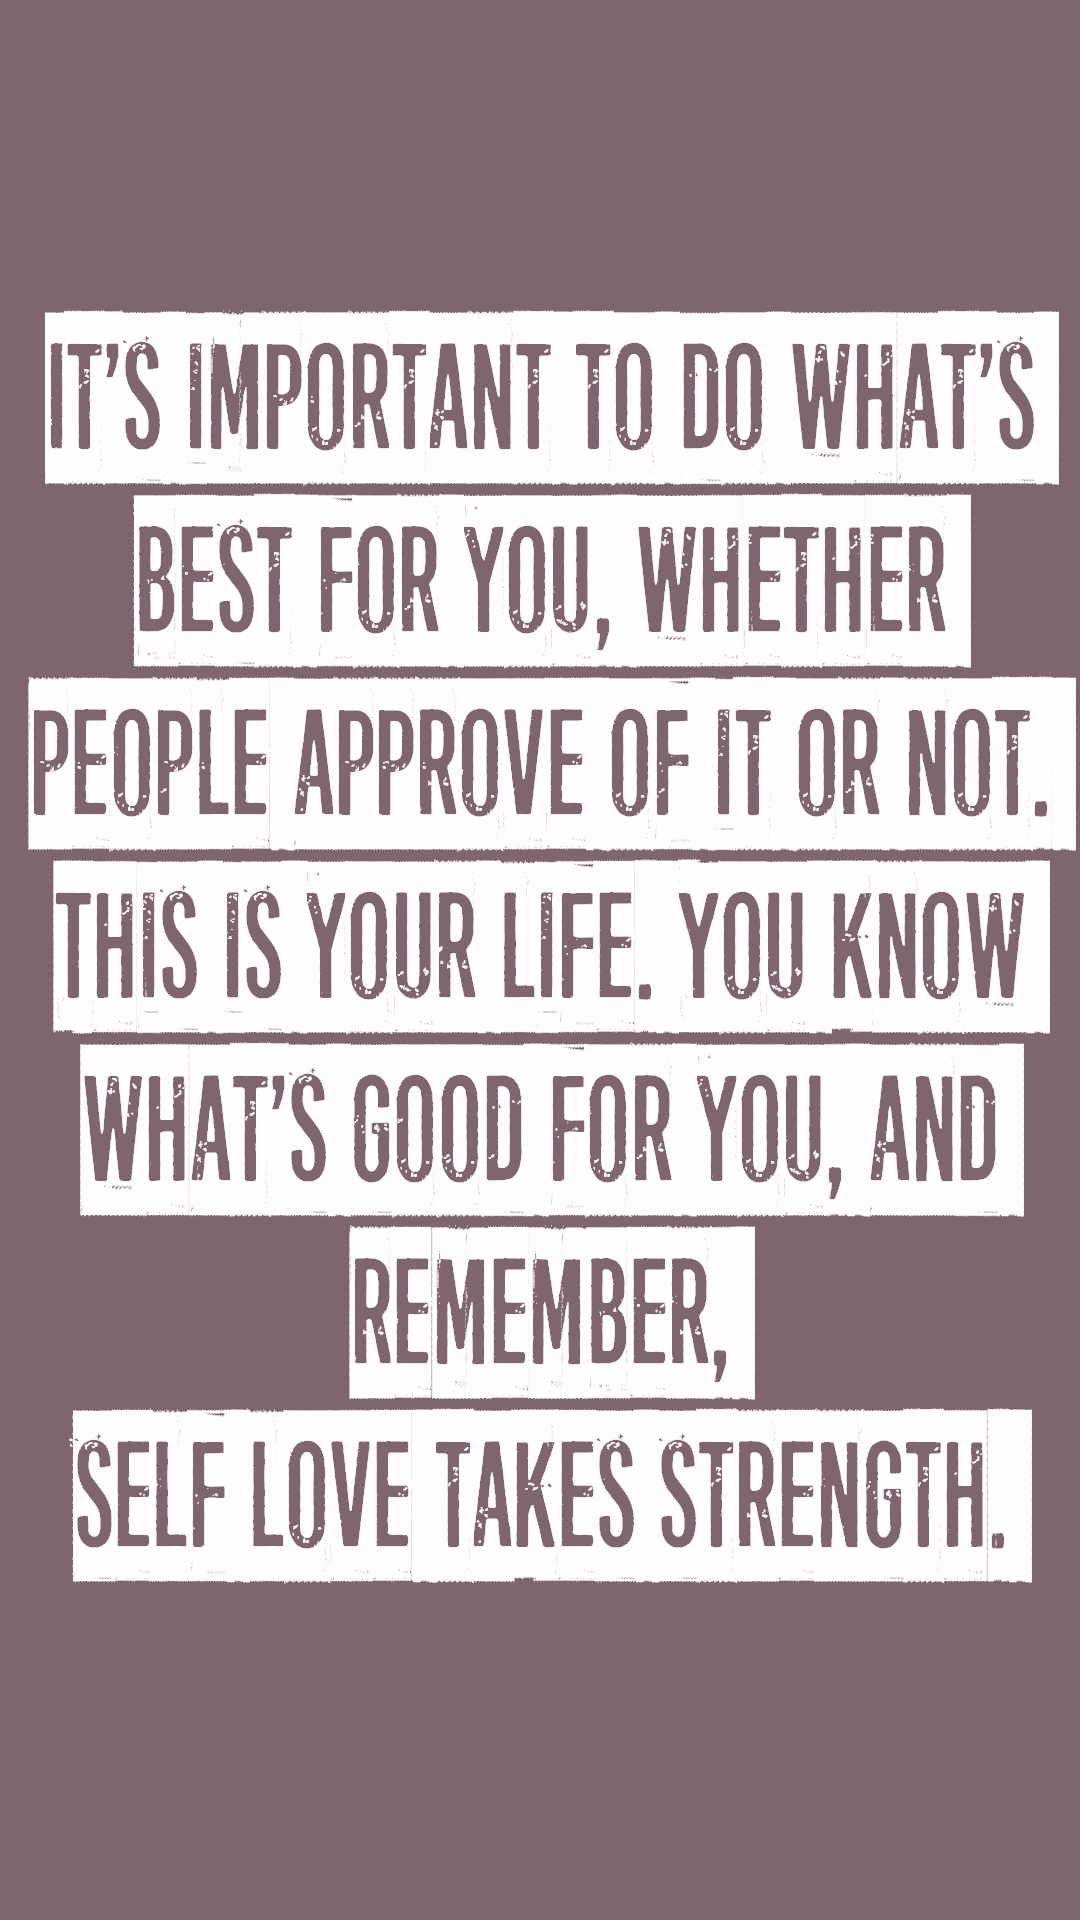 Phone Wallpaper, Phone Background, Quotes To Live By, - Love Wallpaper Phone - HD Wallpaper 